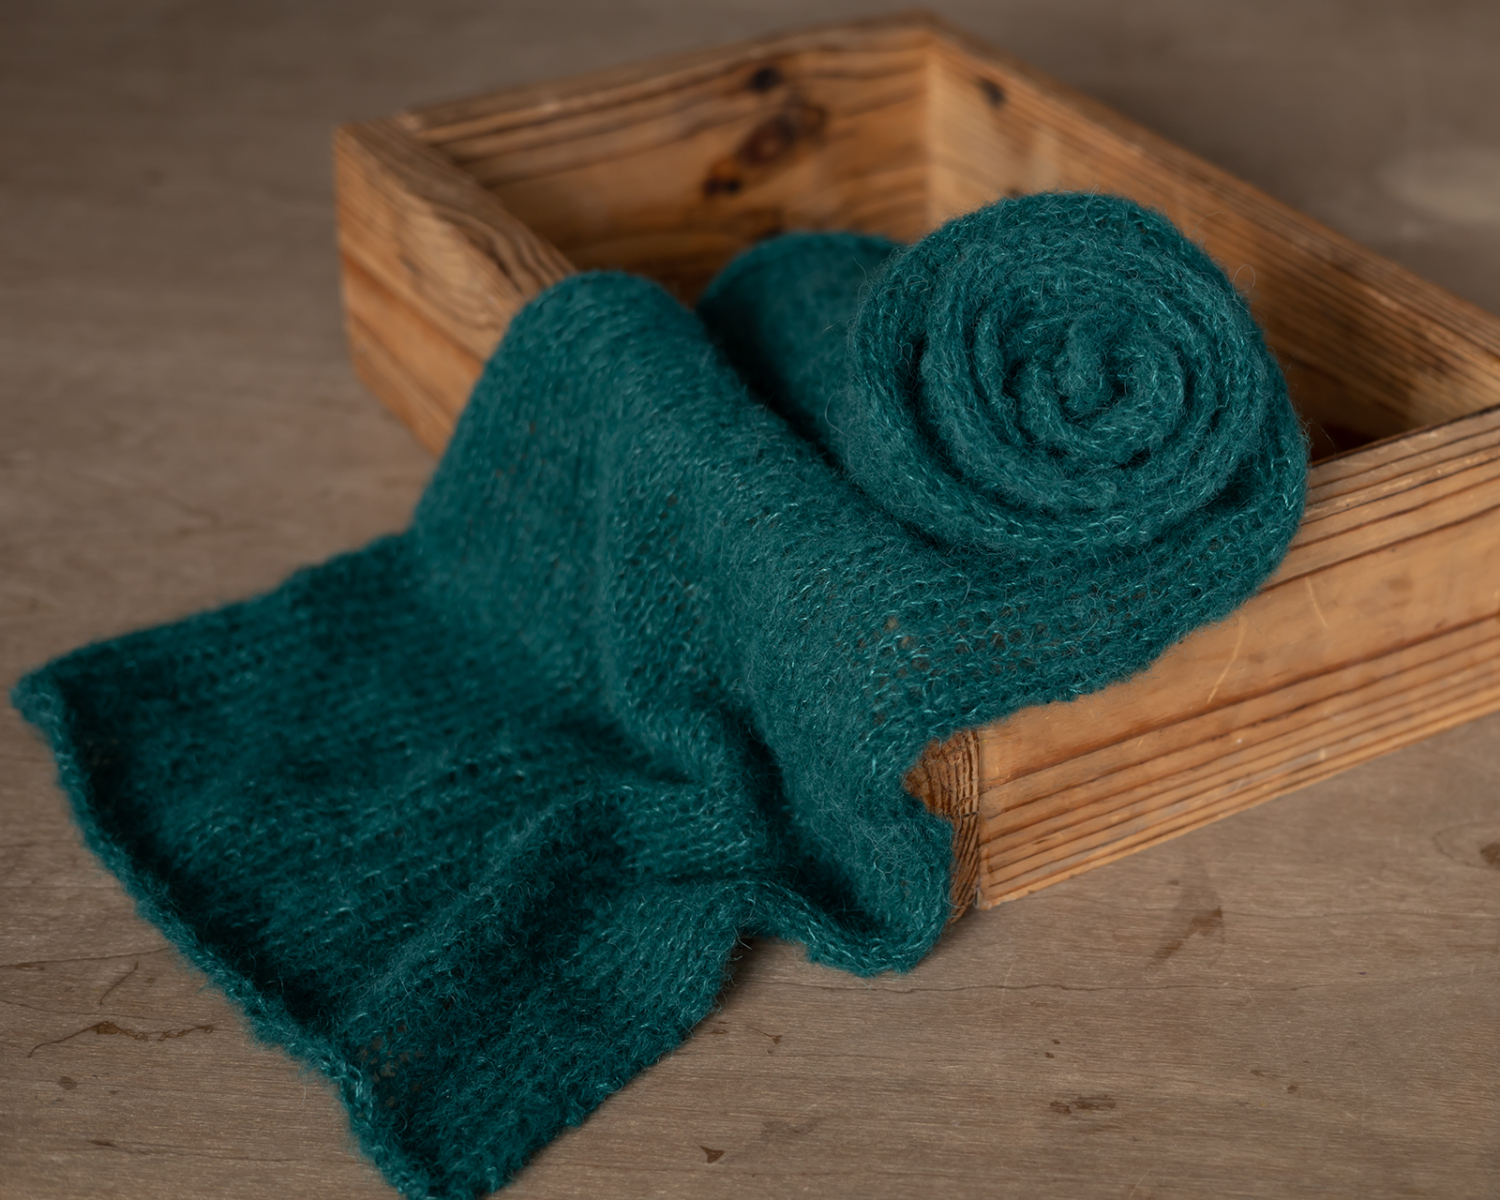 Petrol green mohair knitted Wrap 150cm (59 in)  or set with the matching newborn Bonnet